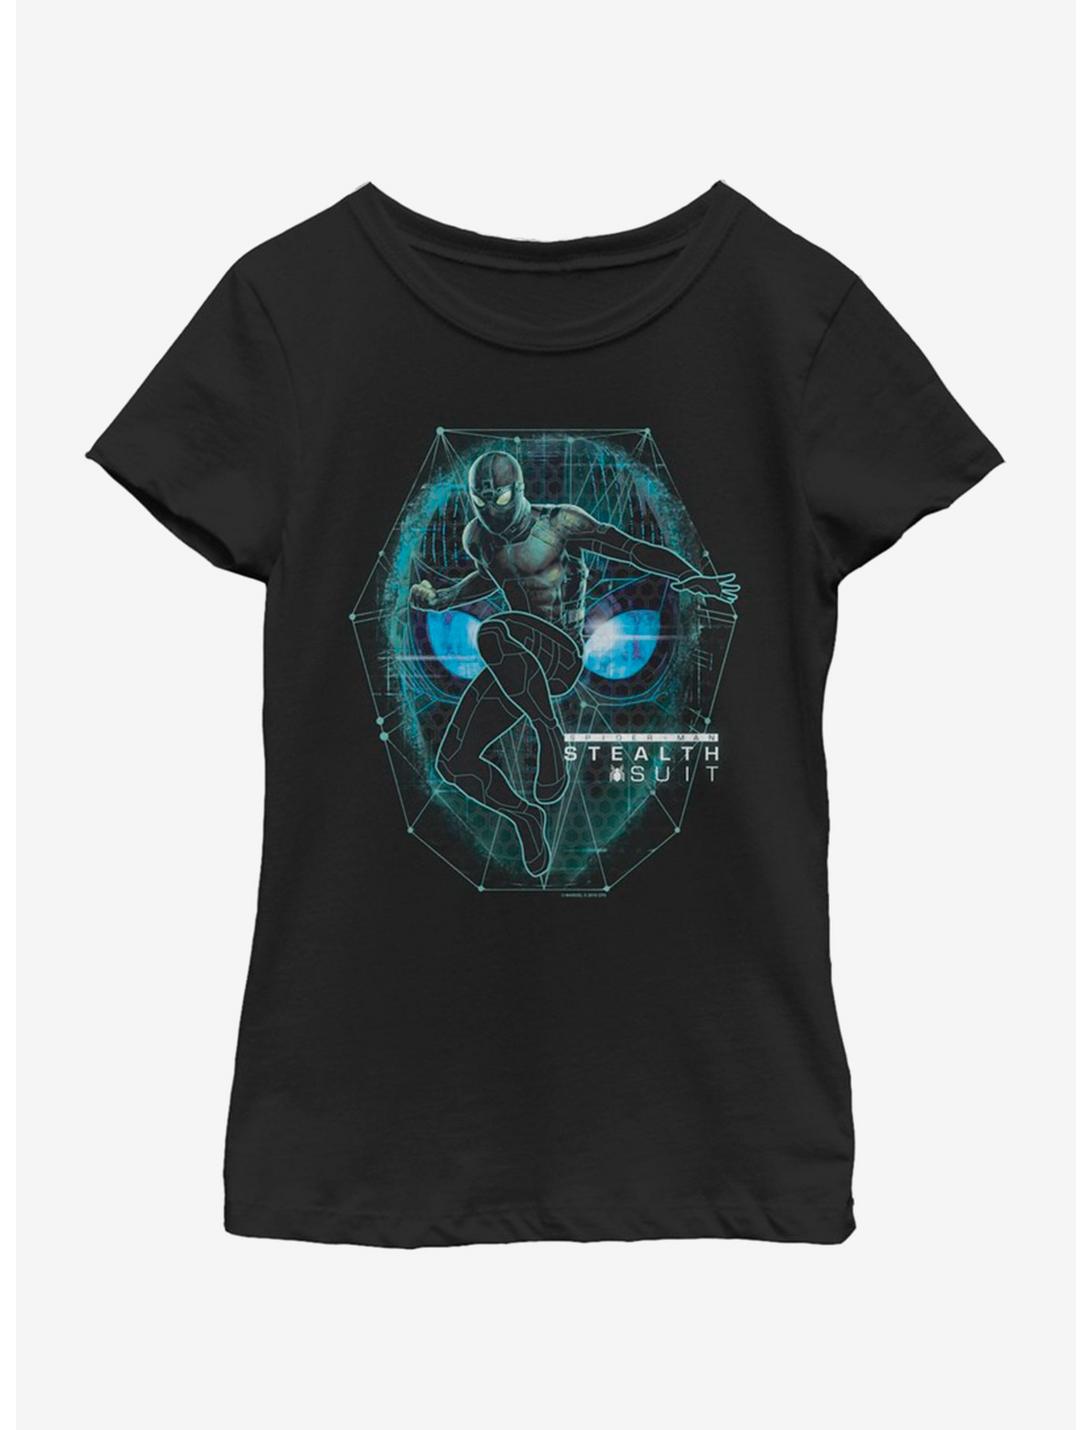 Marvel Spiderman: Far From Home Stealth suit Youth Girls T-Shirt, BLACK, hi-res